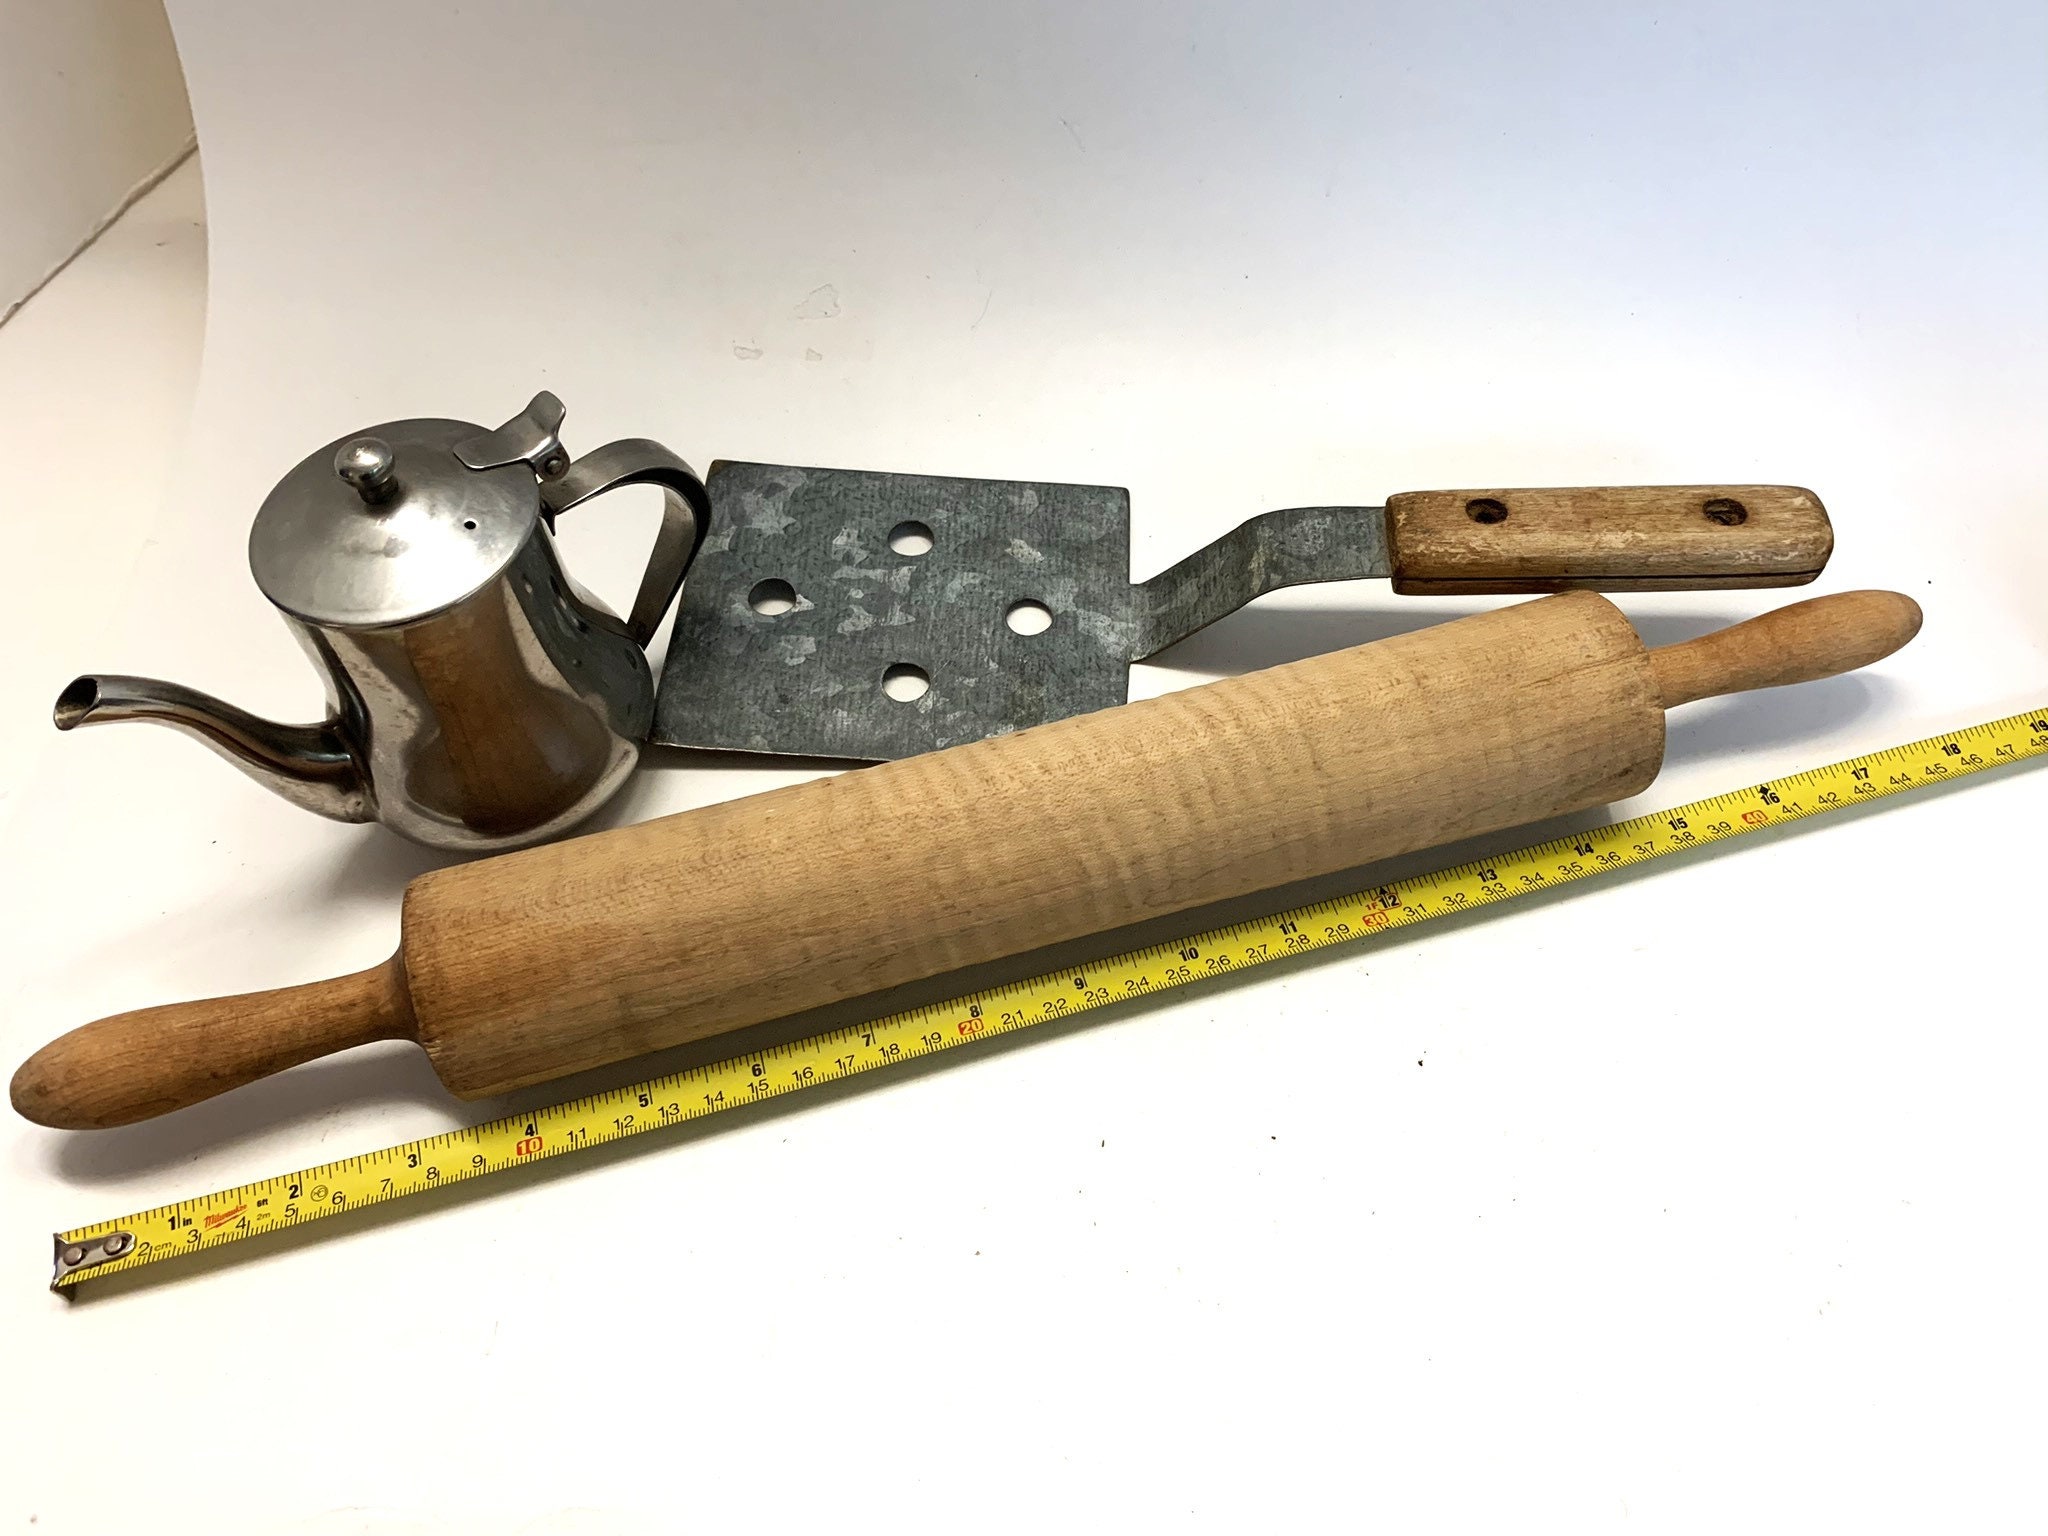 Sold at Auction: 4 Old Kitchen Utensils, Rolling Pin, Masher, Ice Cream  Scoop, Fork, Wooden and Metal